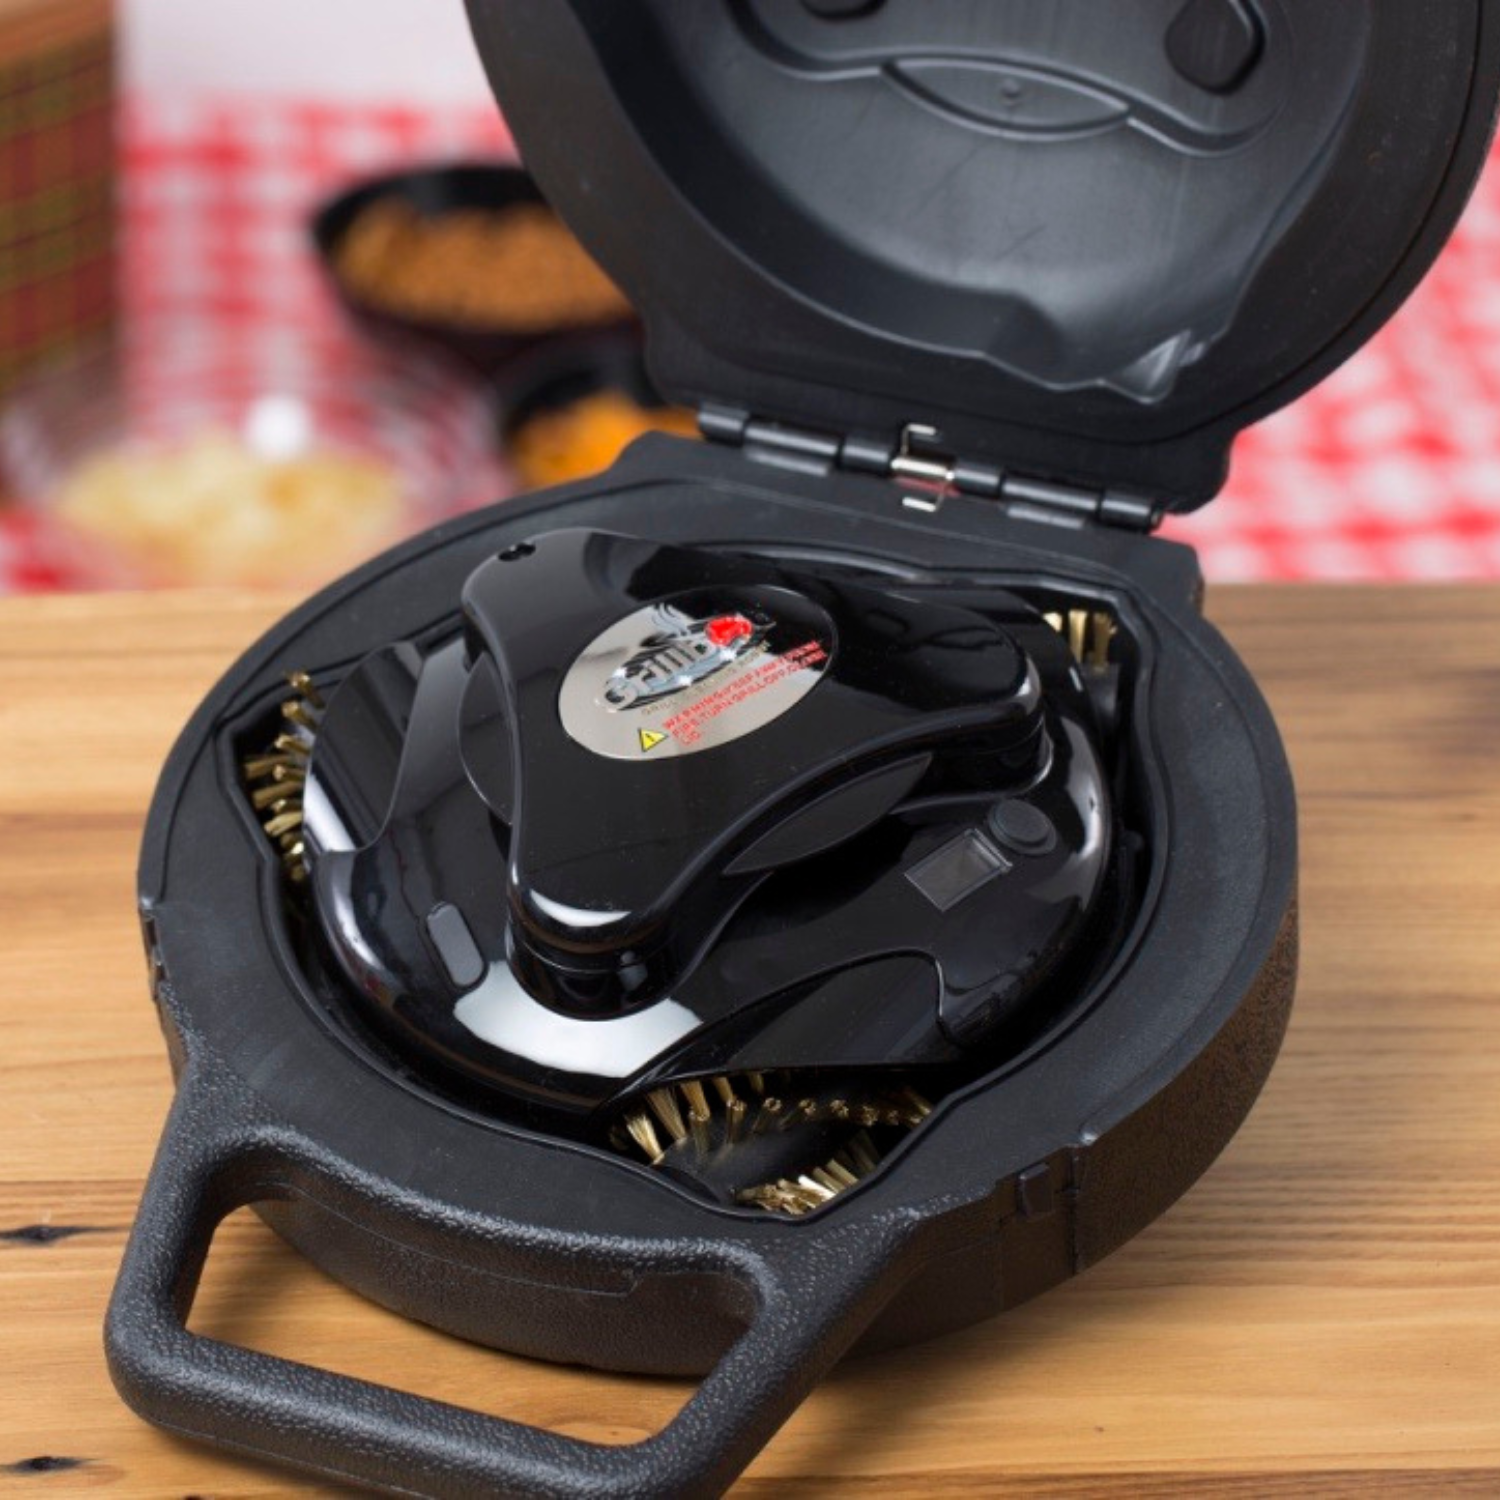 Grillbot - Automatic Grill Cleaning Robot with Carry Case